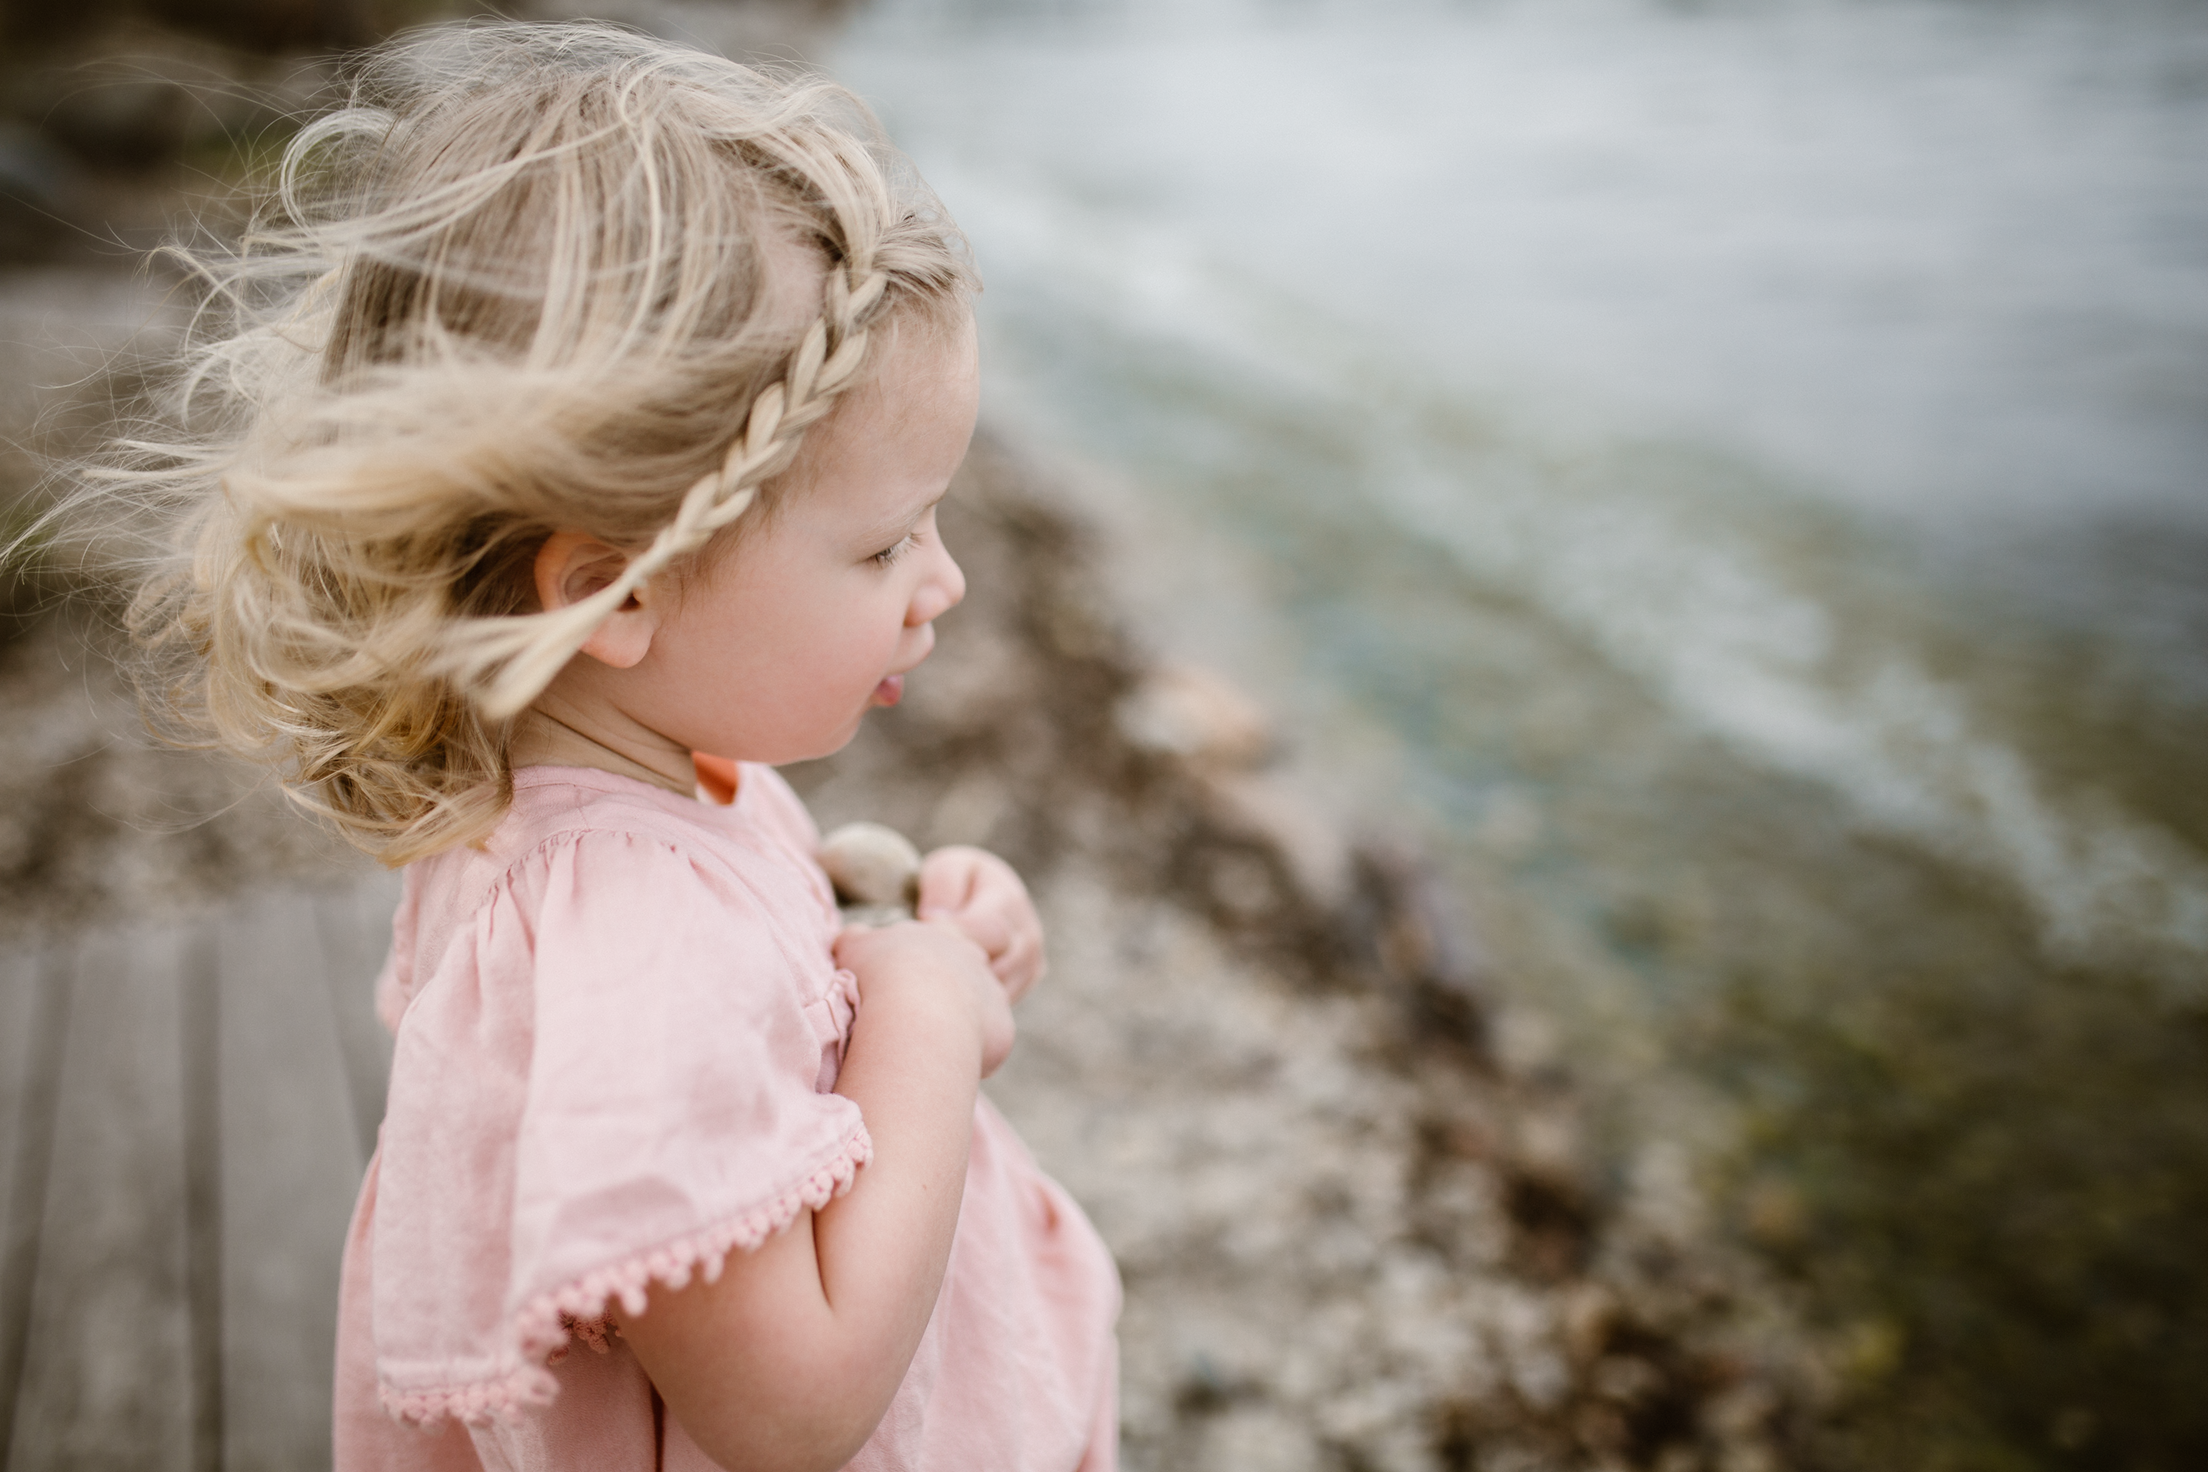 Young girl in a pink dress holding rocks by the lake.